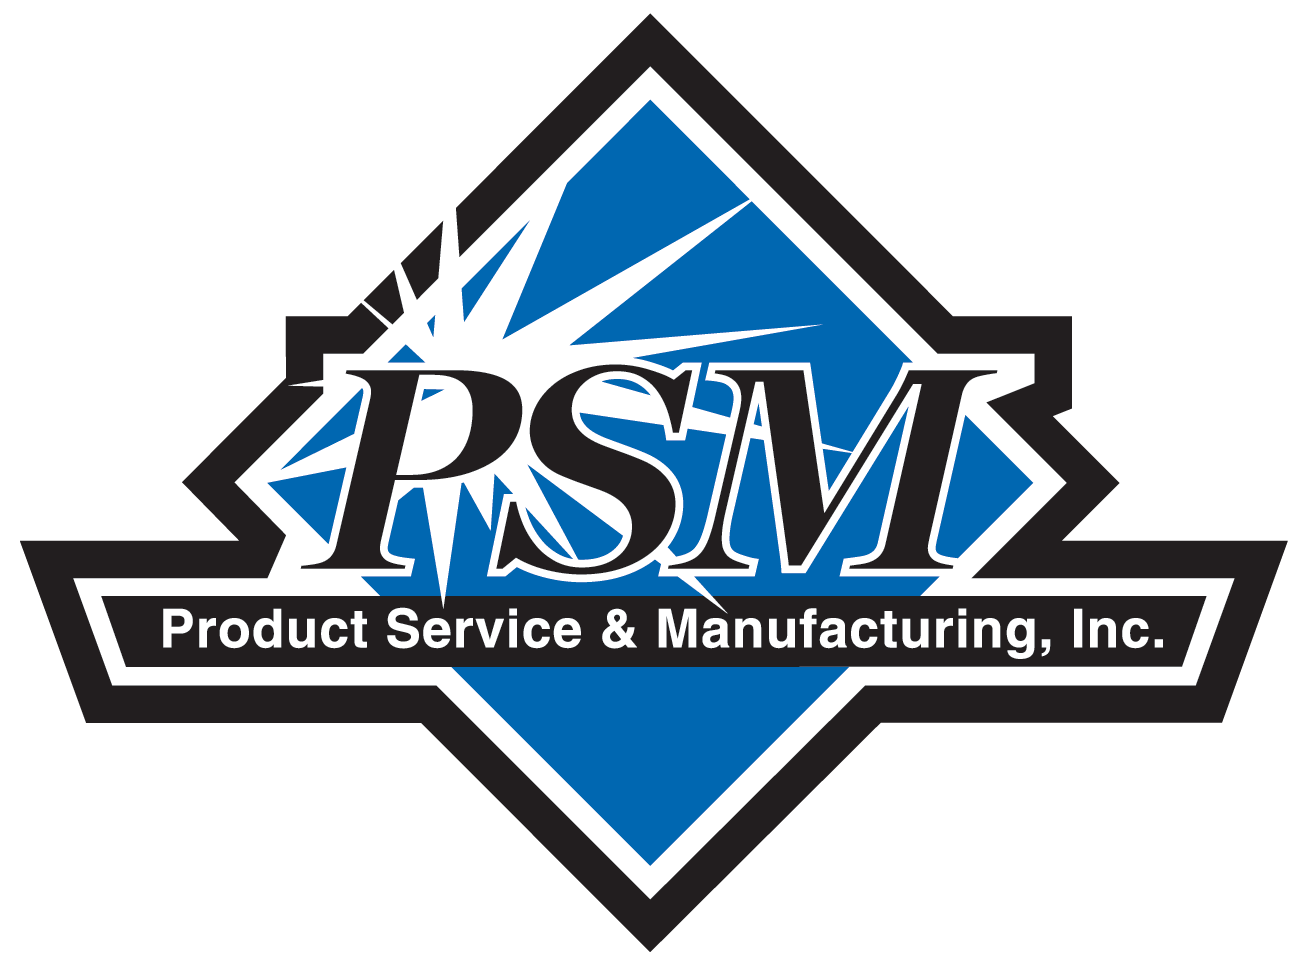 Product Service & Manufacturing